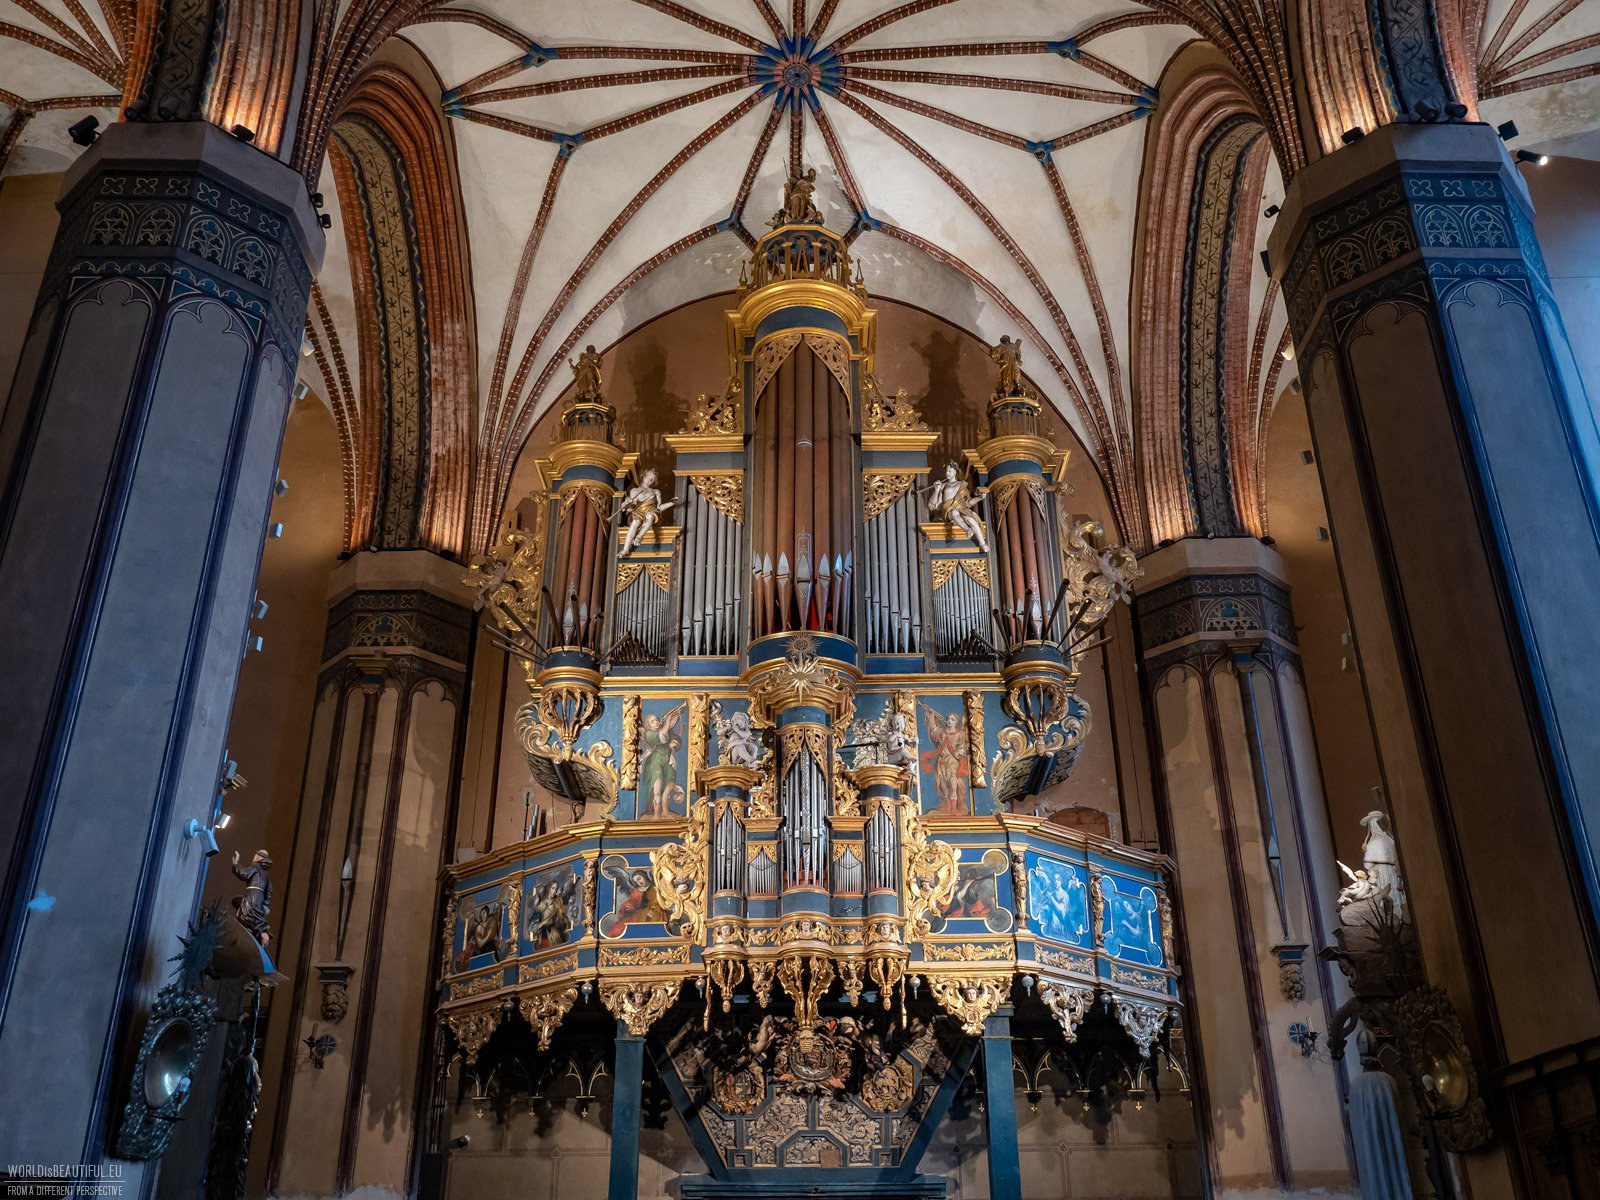 The organs of the Frombork cathedral